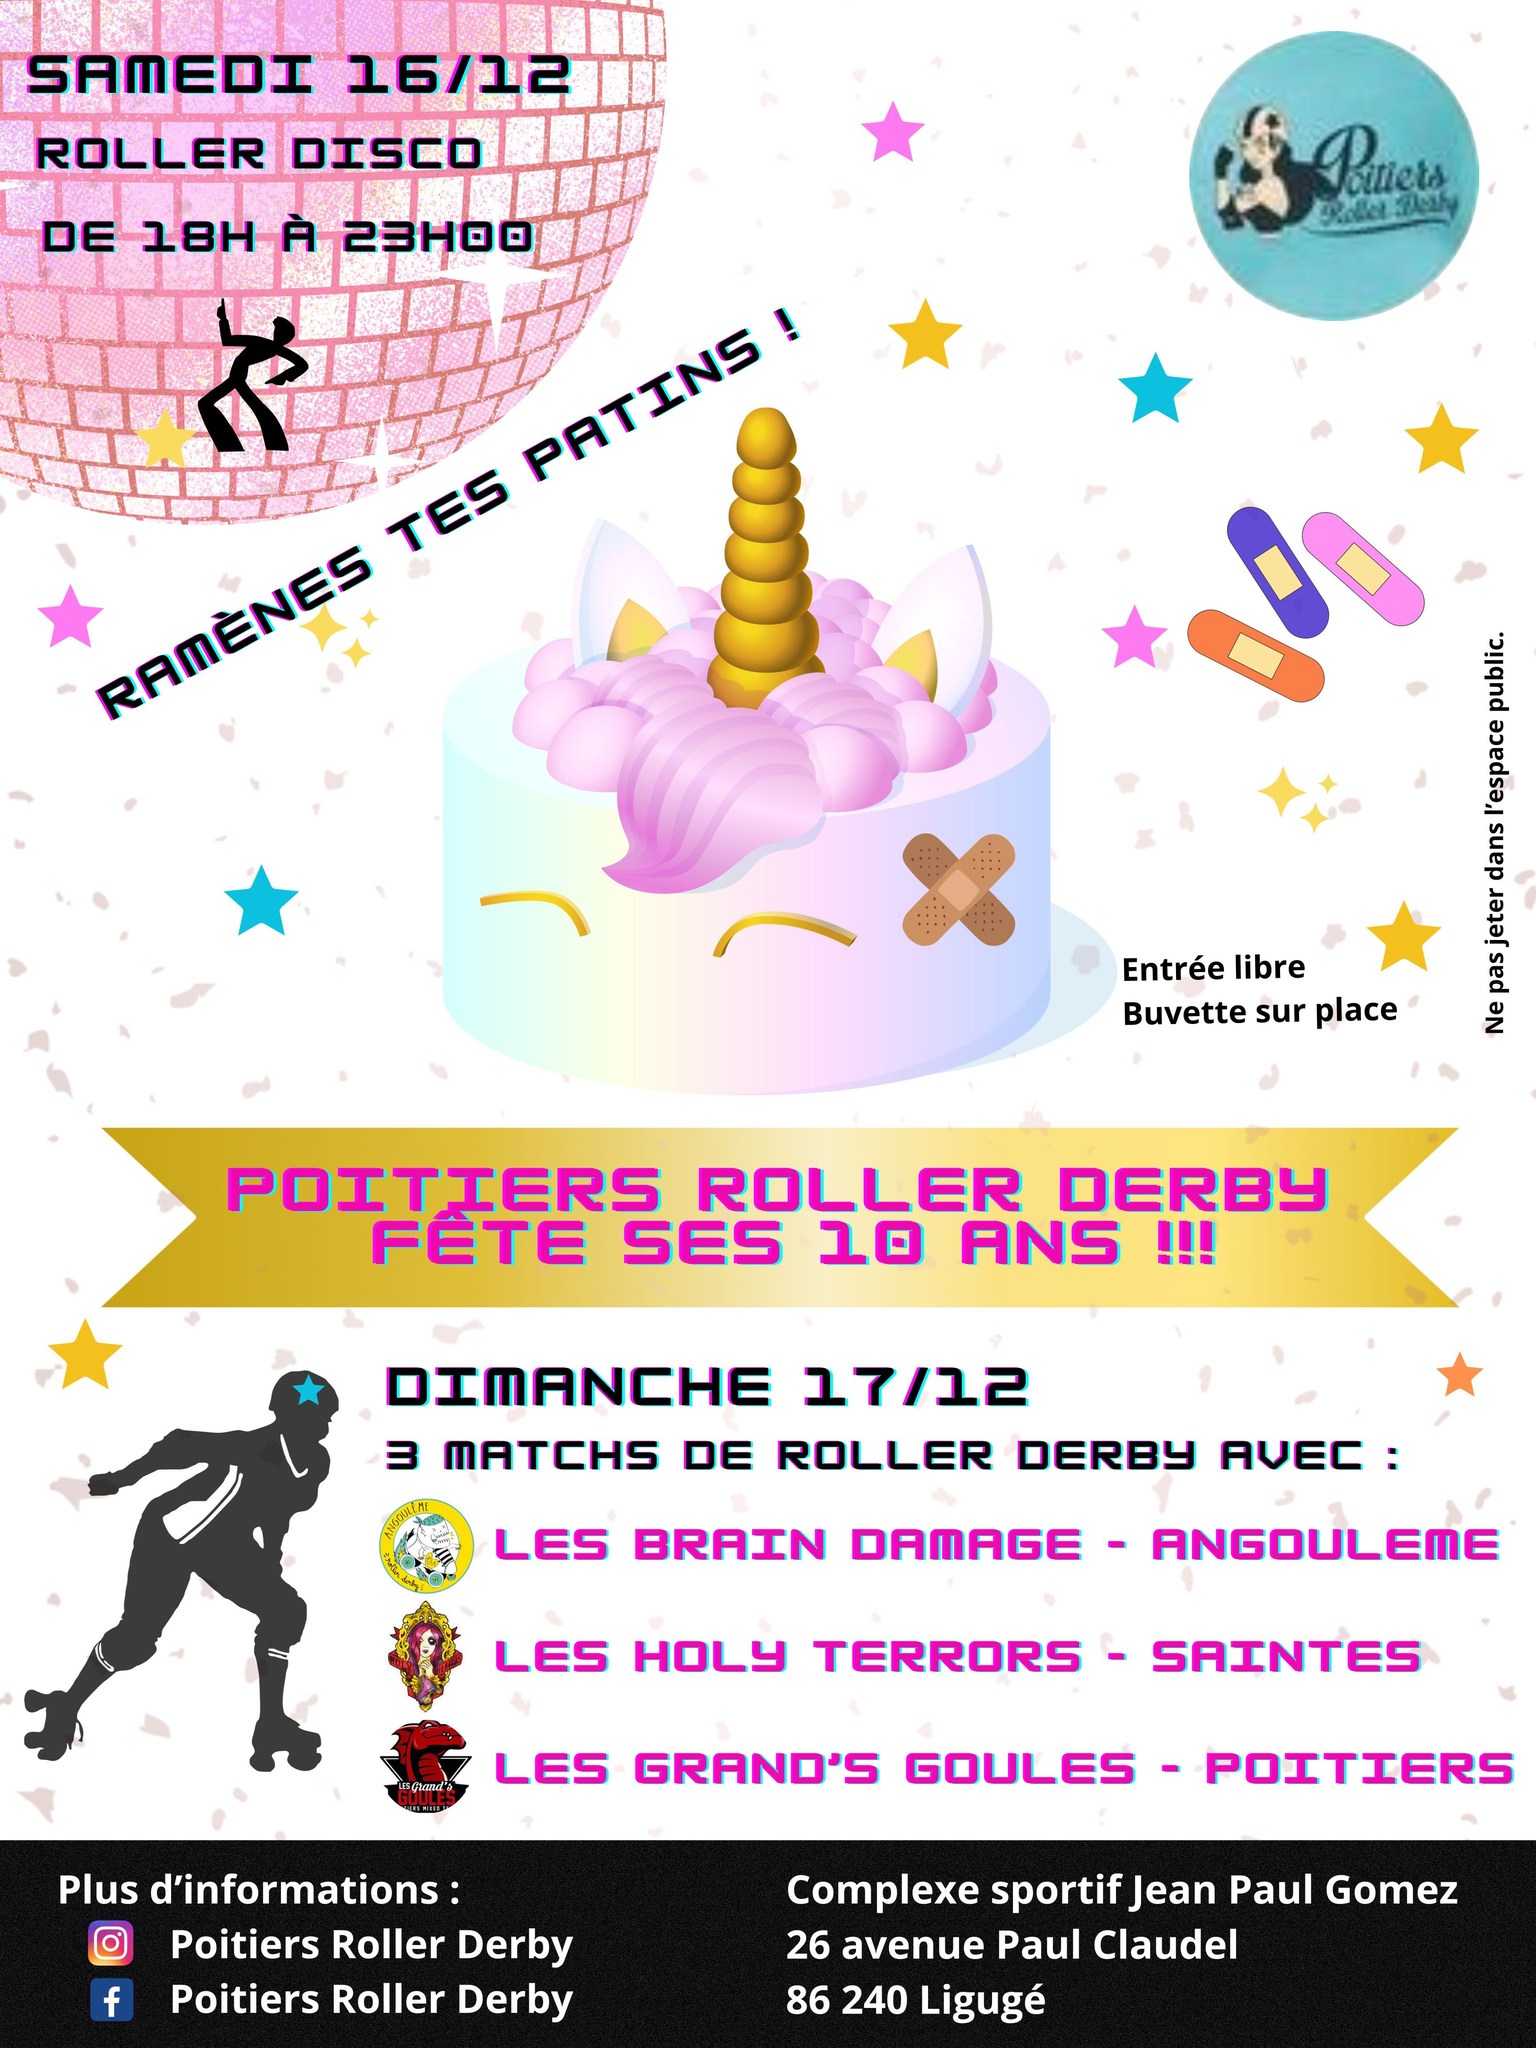 Rollers 10 ans